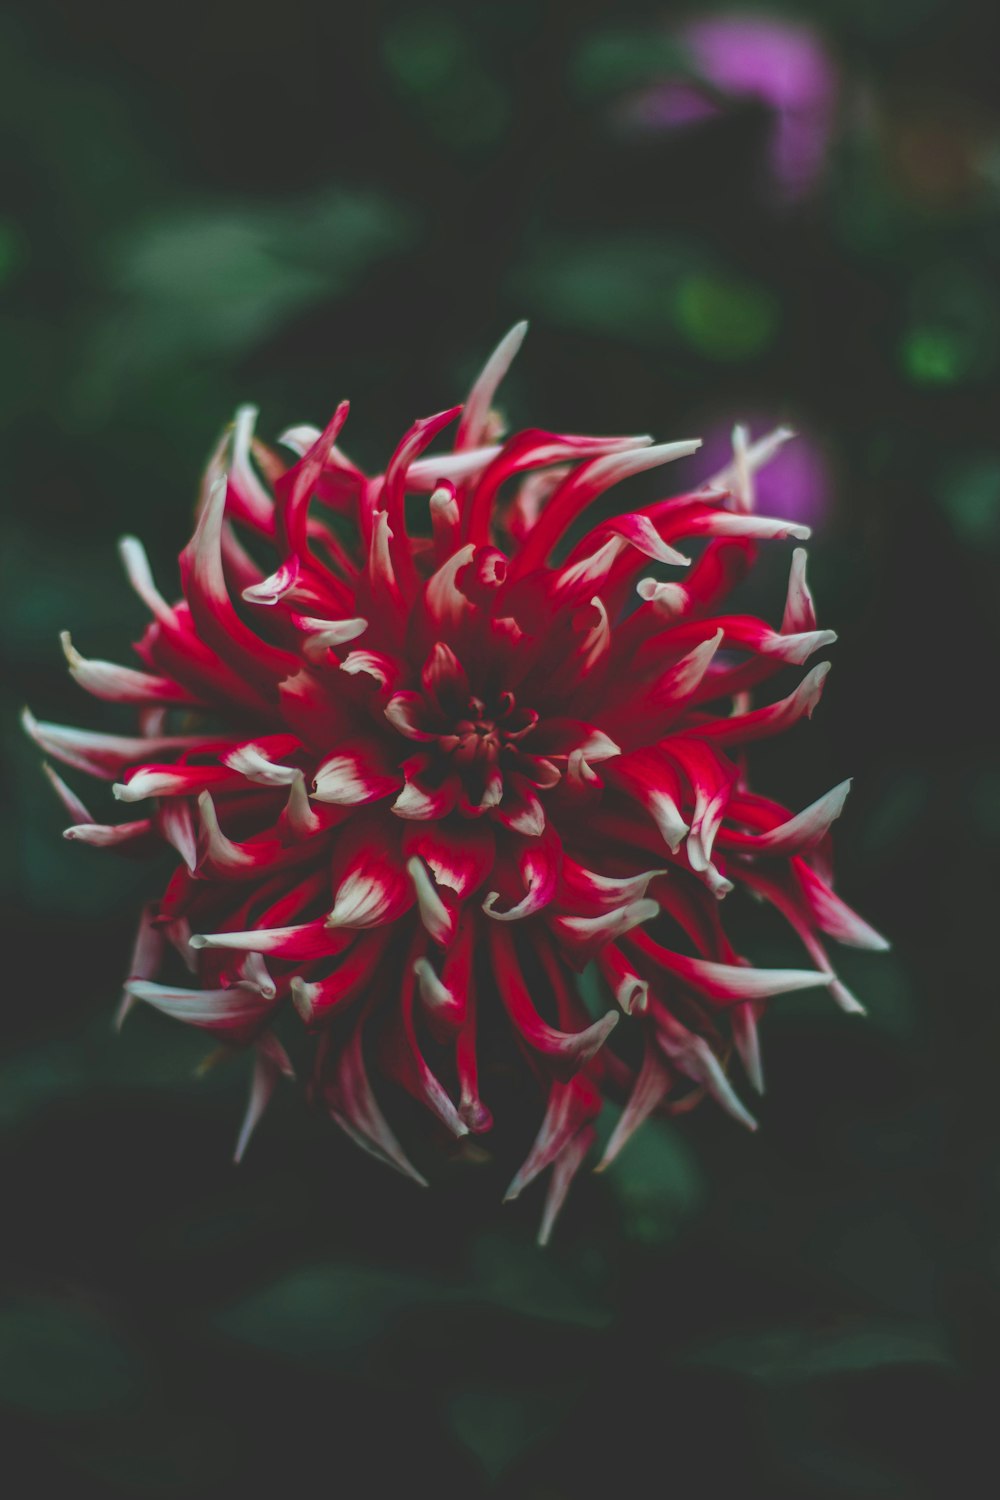 closeup photography of red petaled flower